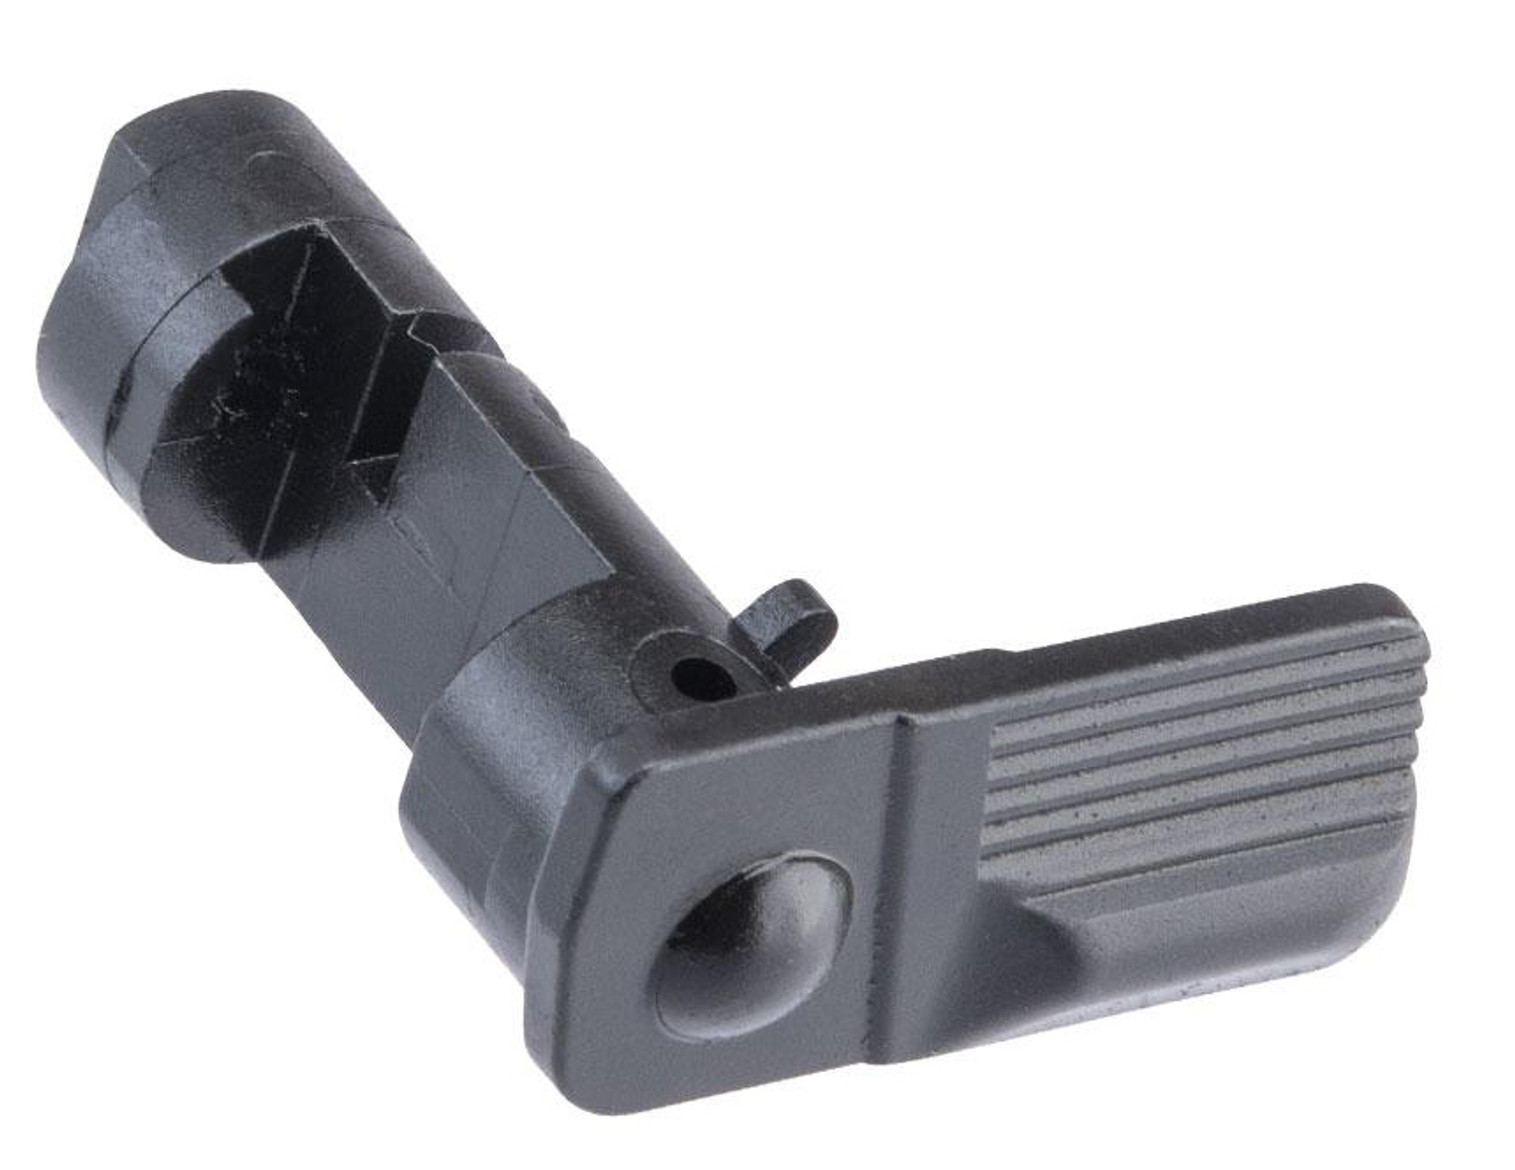 Guarder Steel Takedown Lever for Tokyo Marui P226 Airsoft Gas Blowback Pistols (Color: Black)